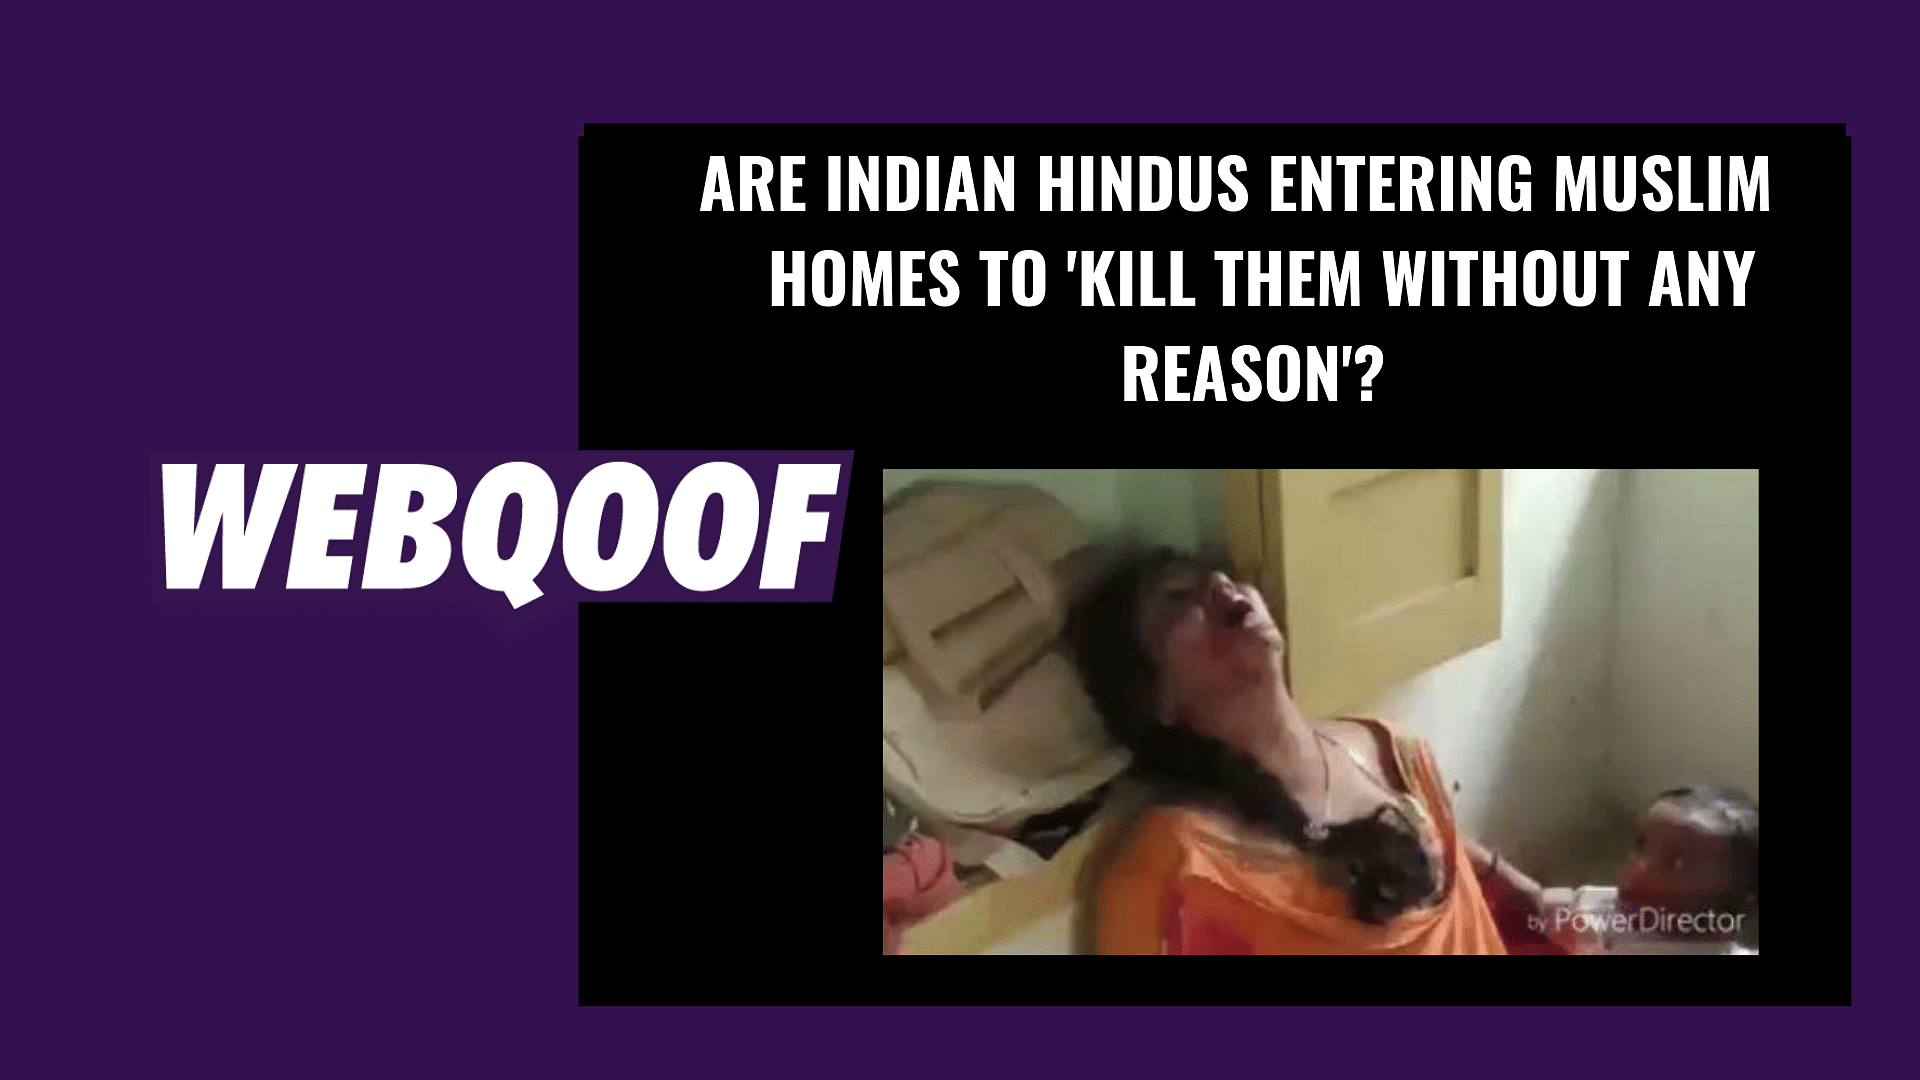 The tweet claims Indian Hindus were entering the homes of Muslims and killing them without any reason.